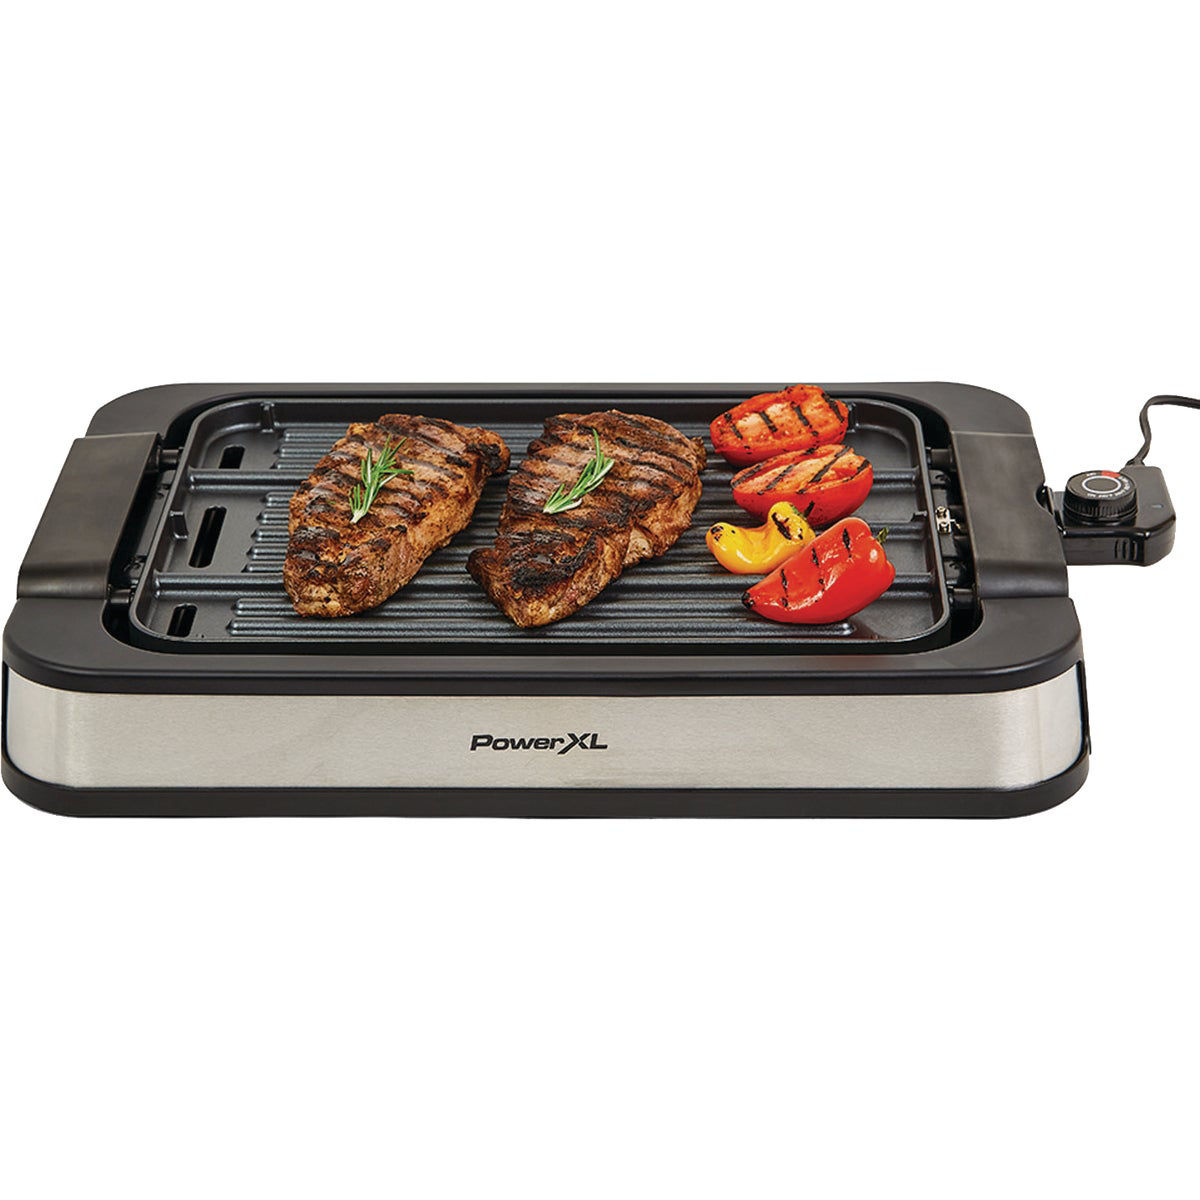 4-in-1 Indoor Grill & Electric Griddle Combo with Bacon Cooker